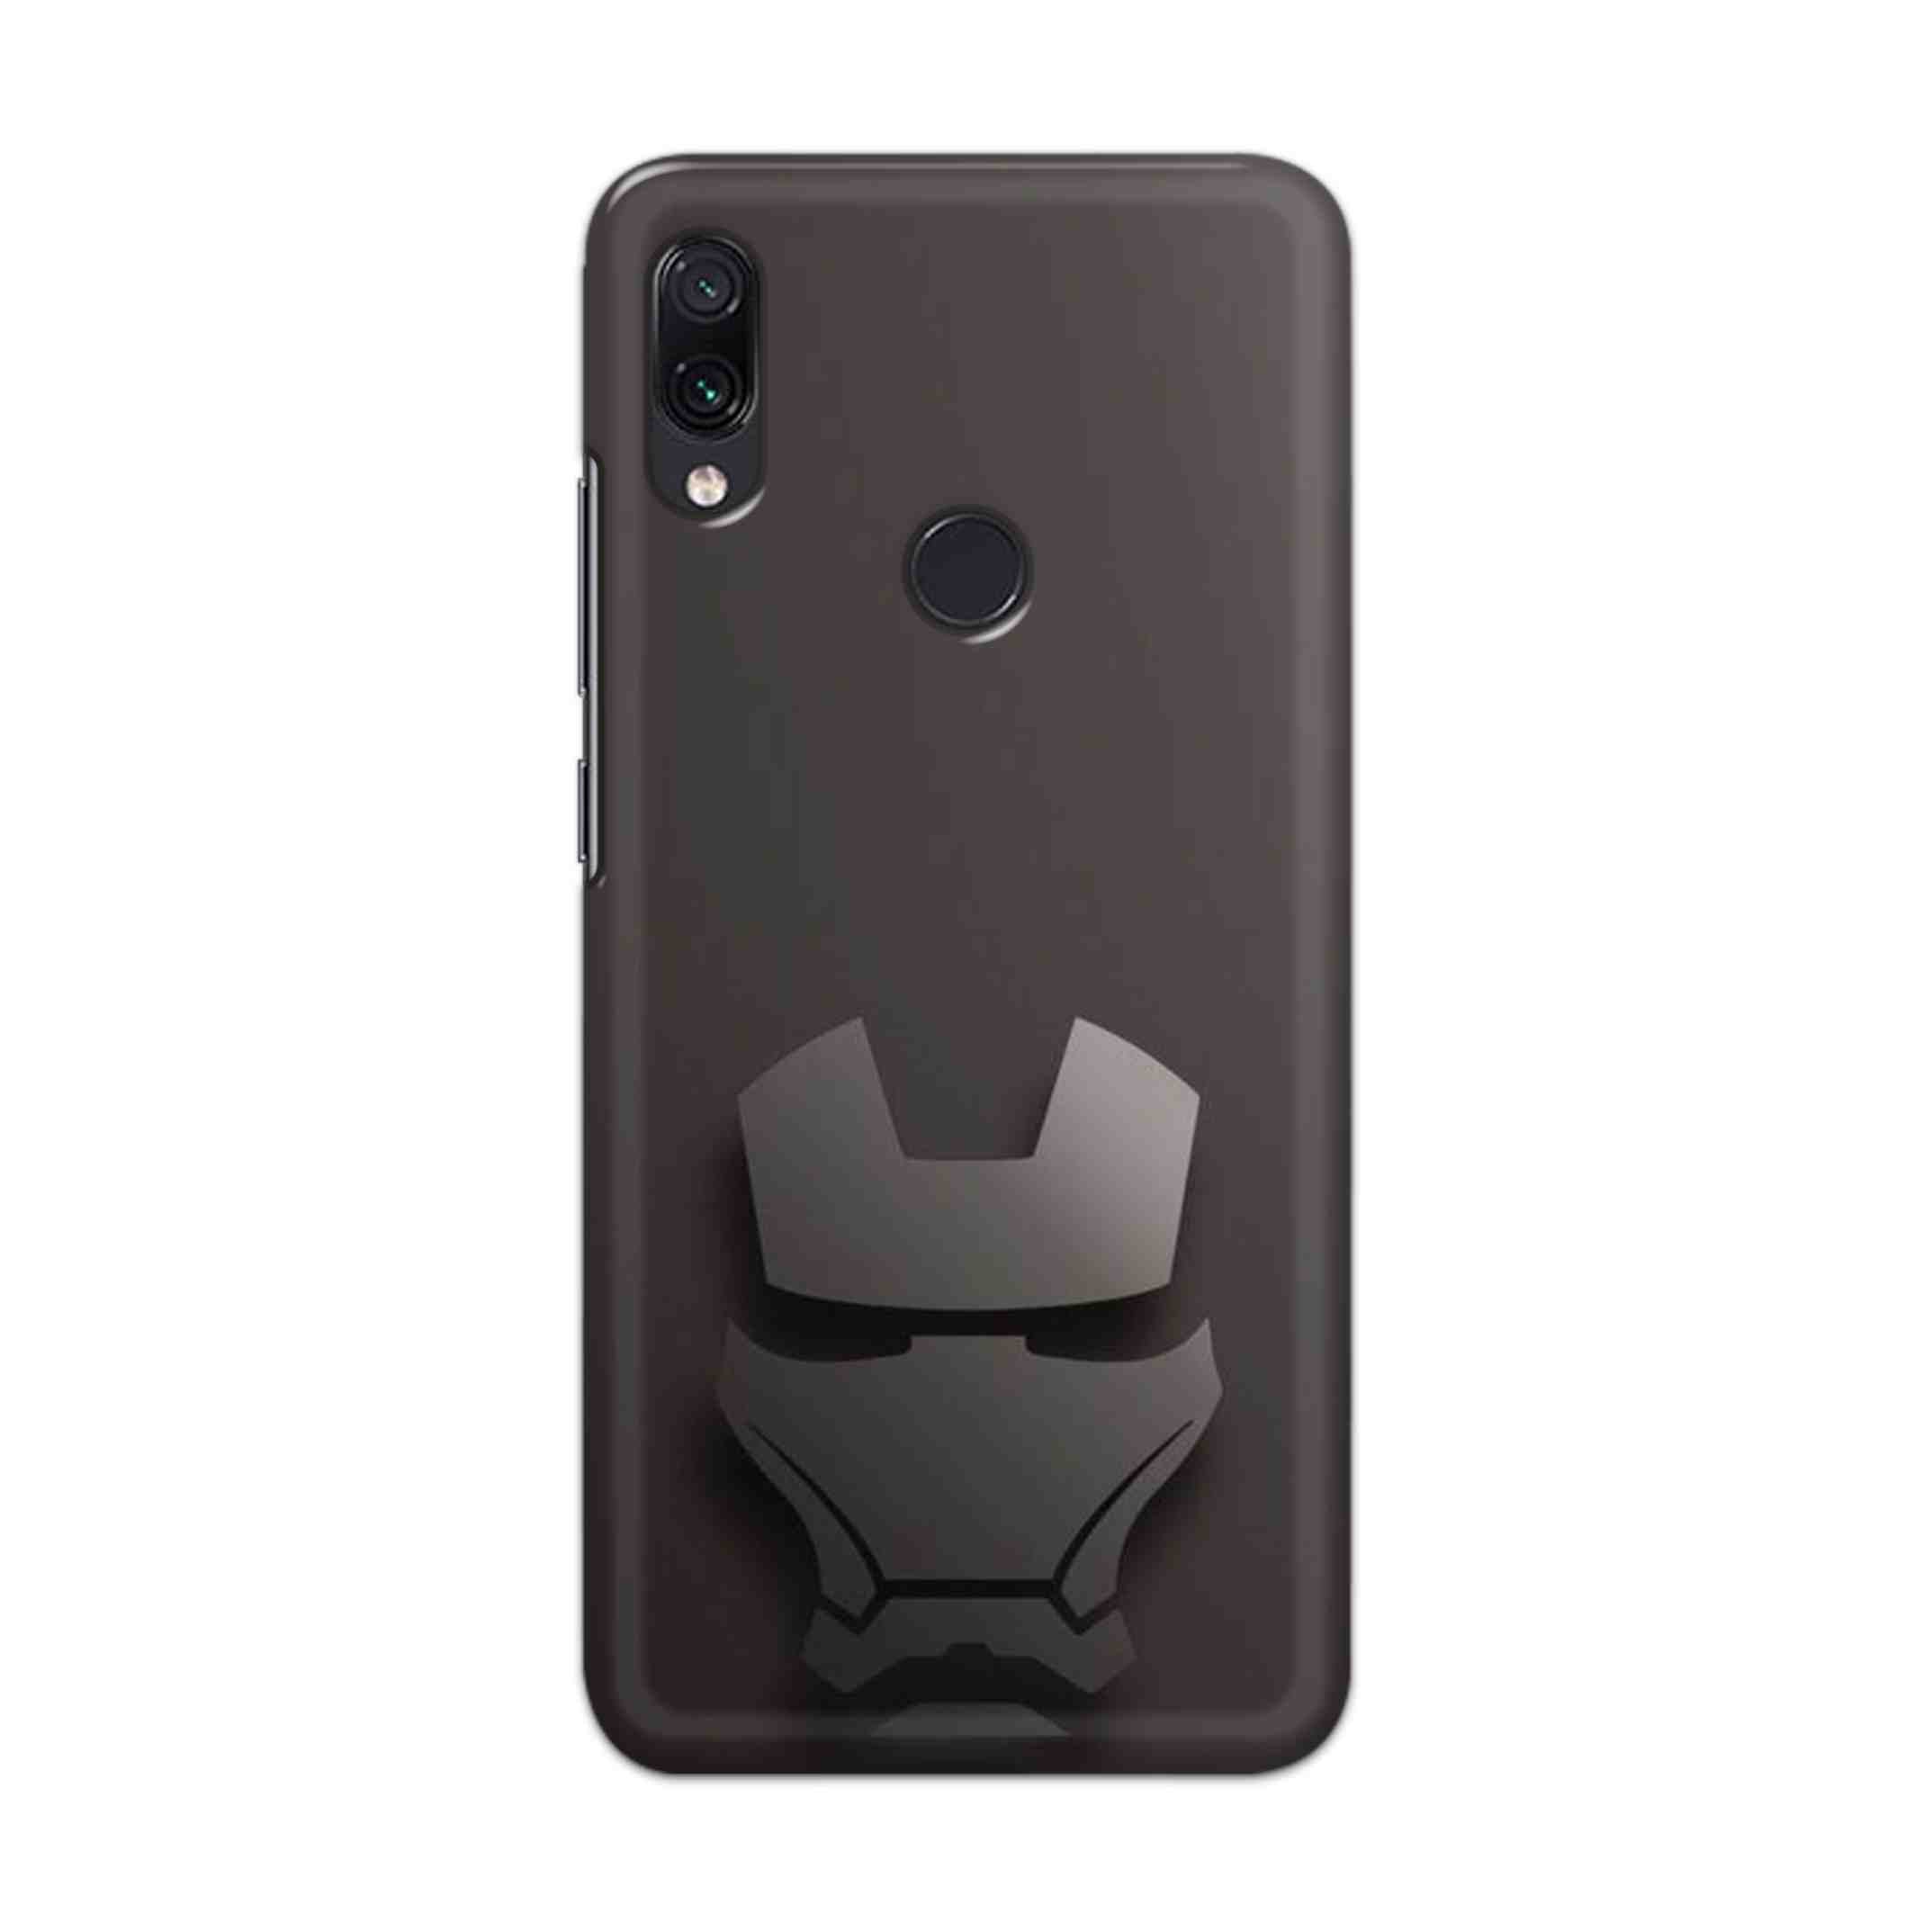 Buy Iron Man Logo Hard Back Mobile Phone Case Cover For Xiaomi Redmi 7 Online